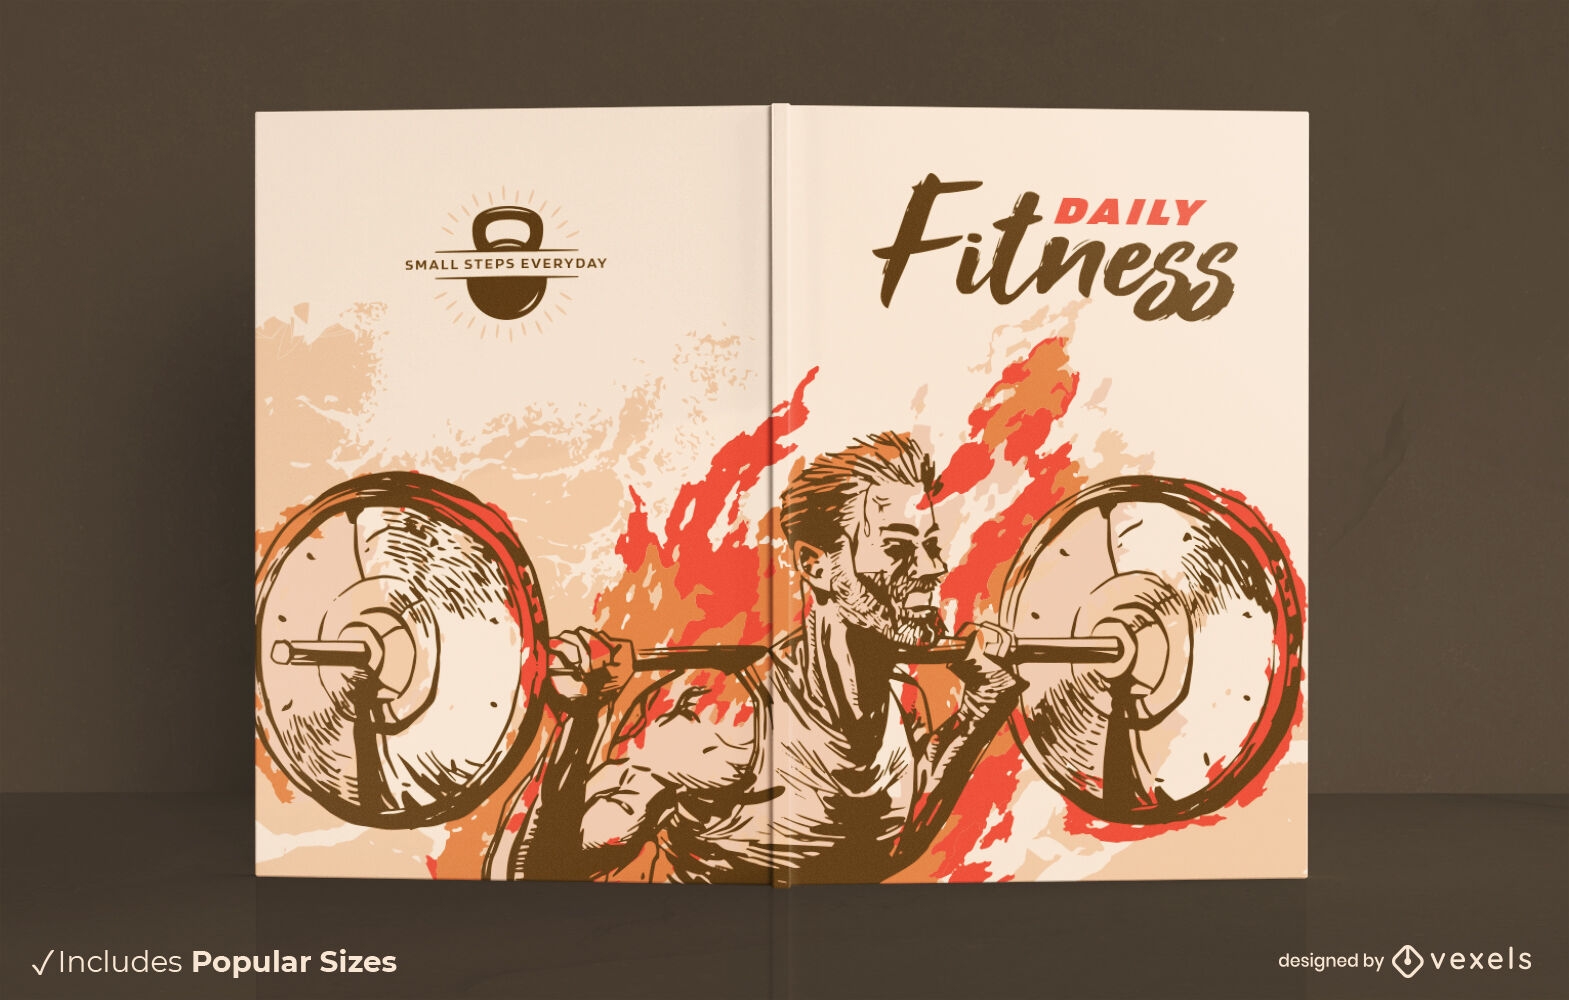 Awesome daily fitness book cover design